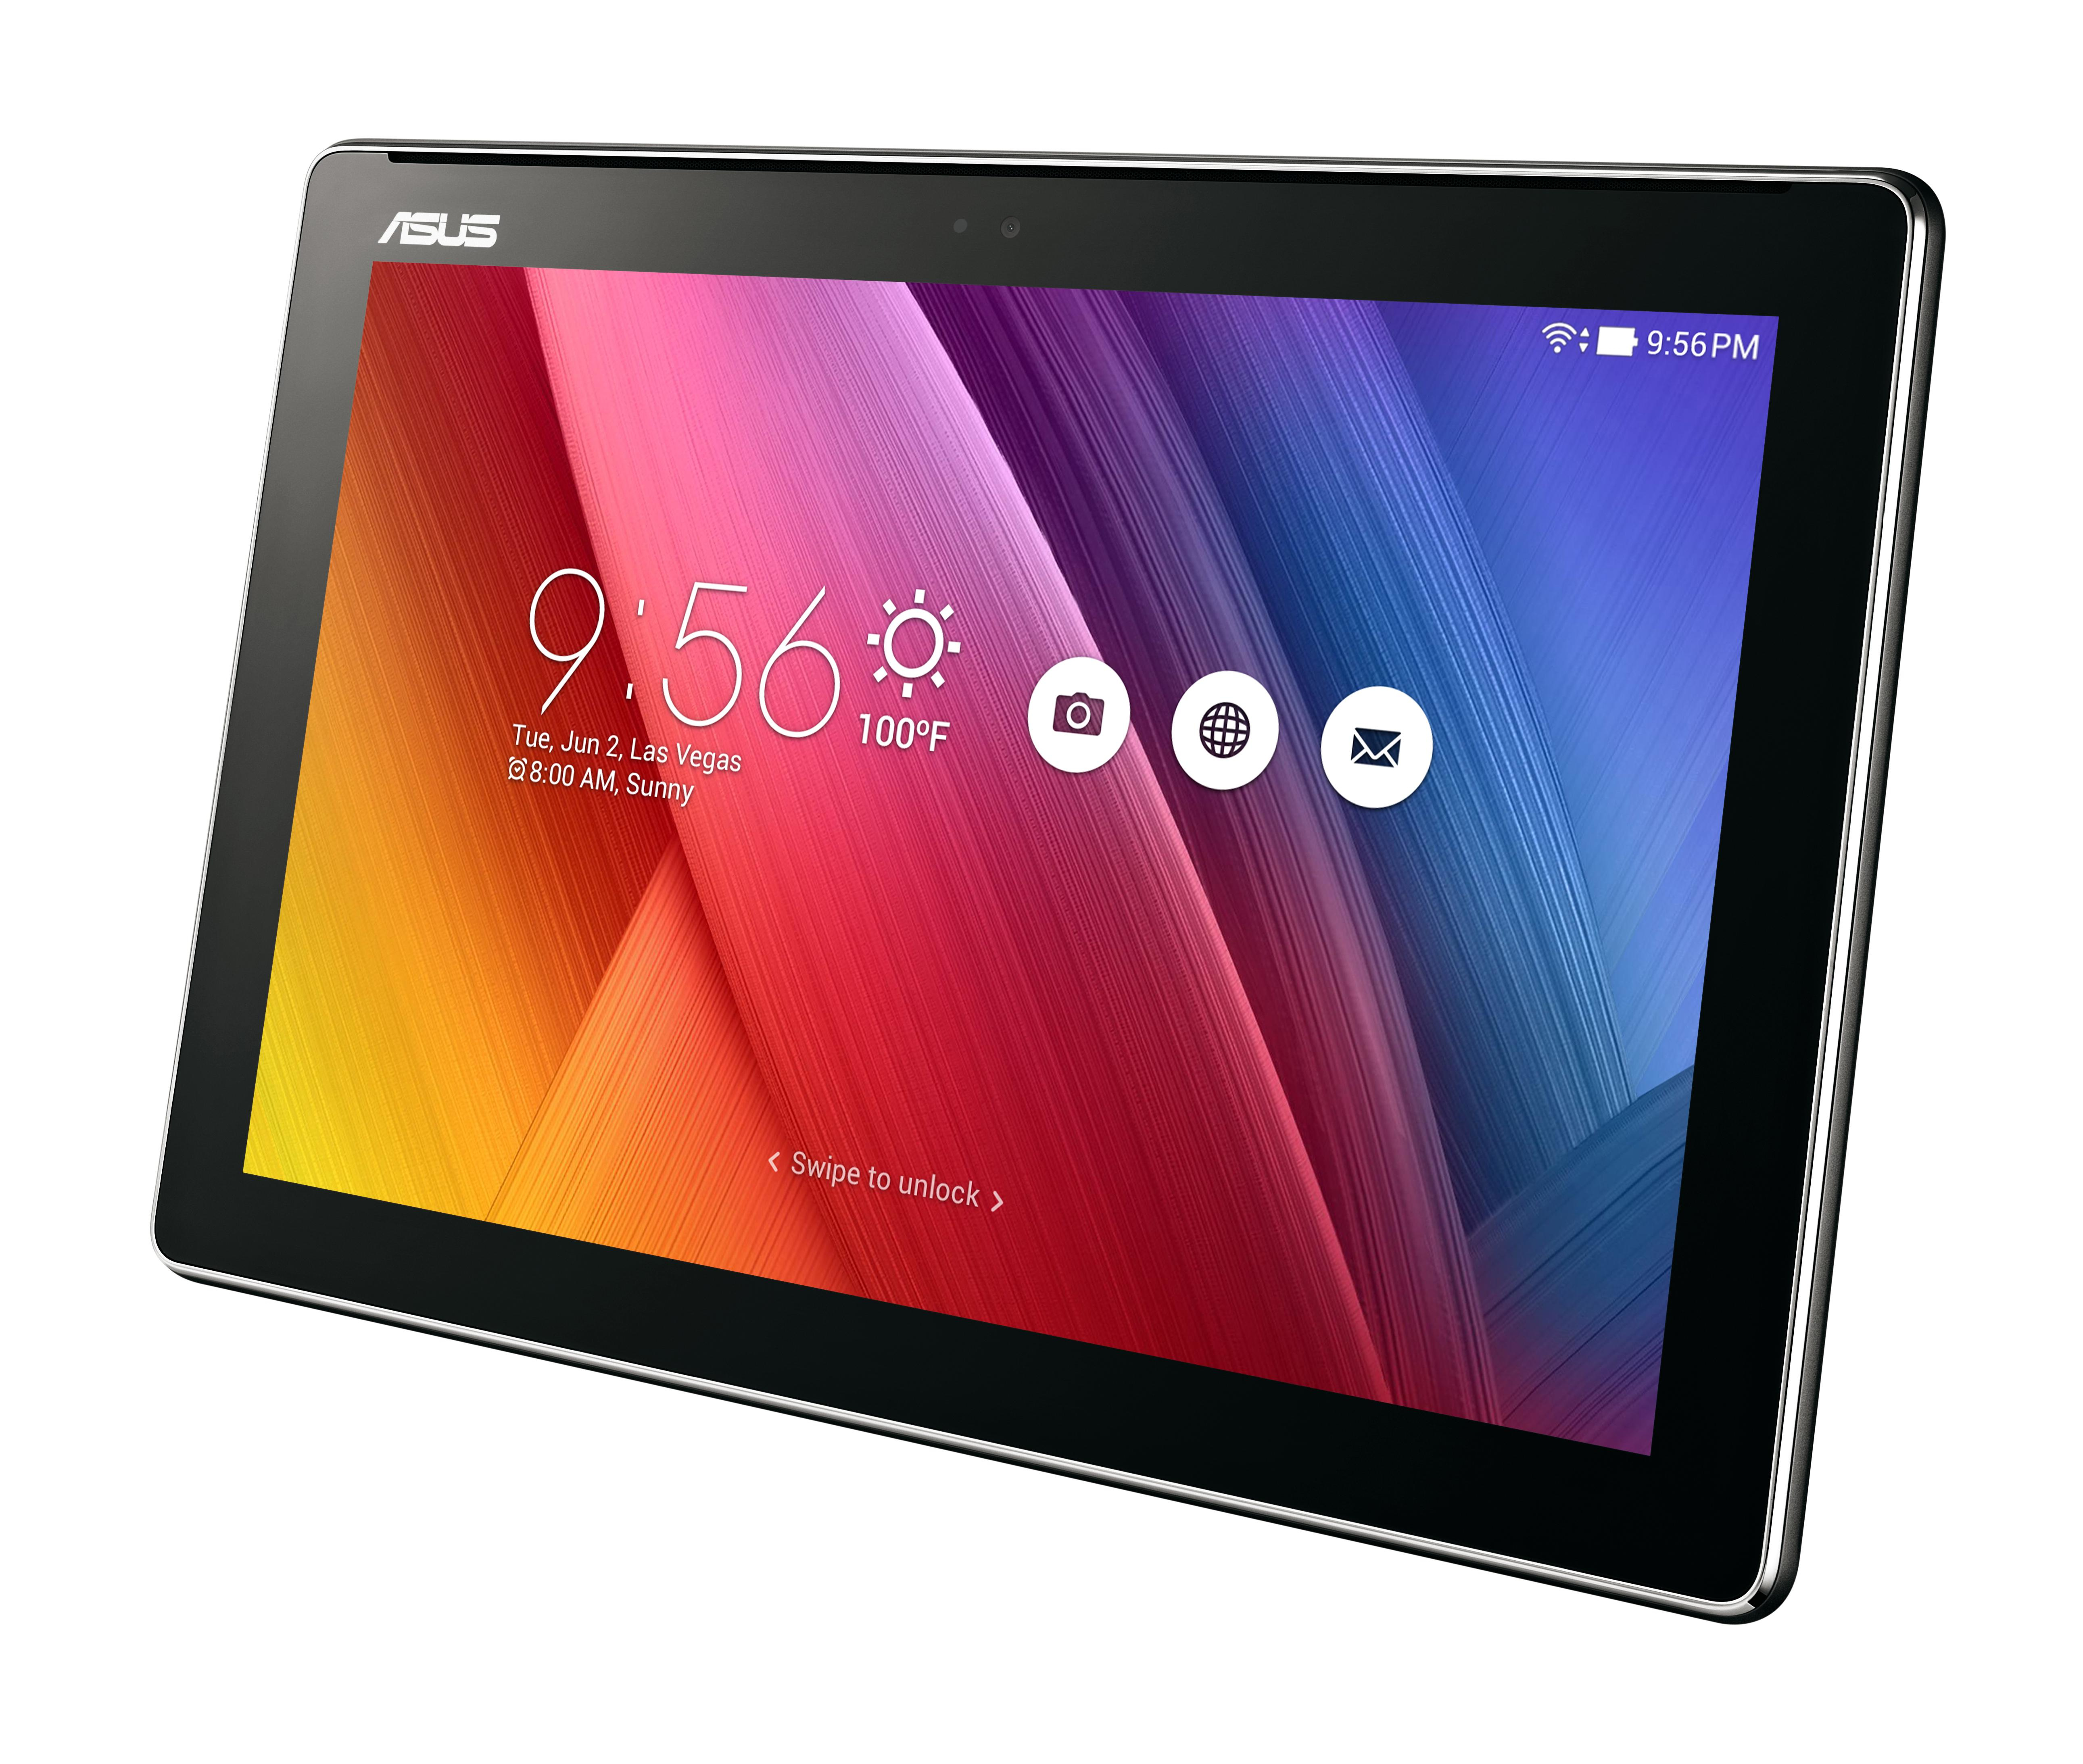 Image of Asus Z300M 10i IPS 1280x800 MTK 8163 Quad-core 1.3 GHz 2G